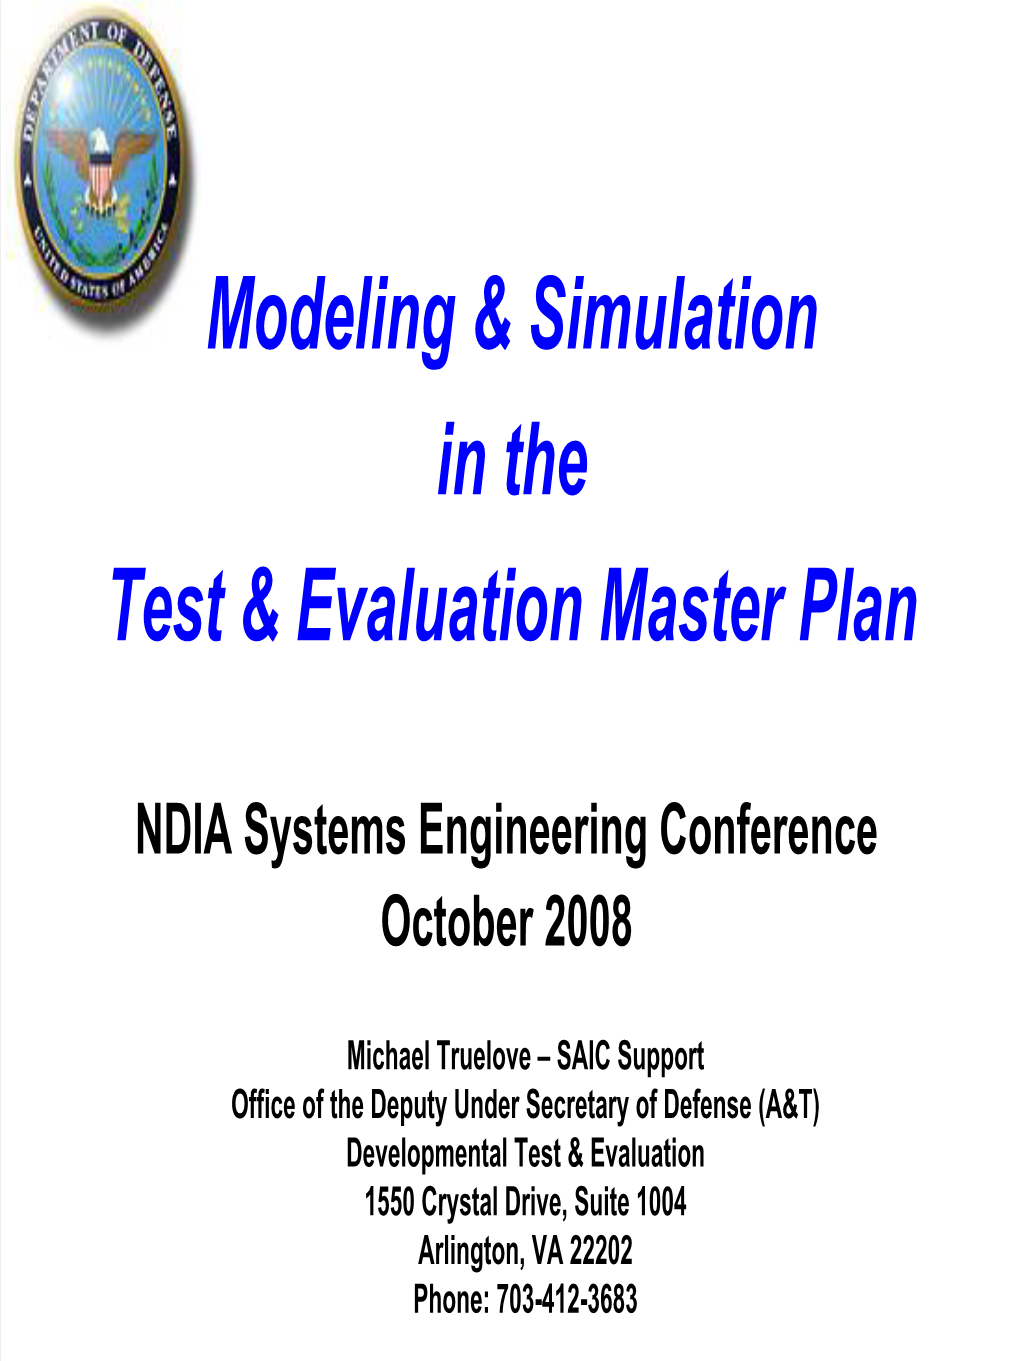 Modeling & Simulation in the Test & Evaluation Master Plan